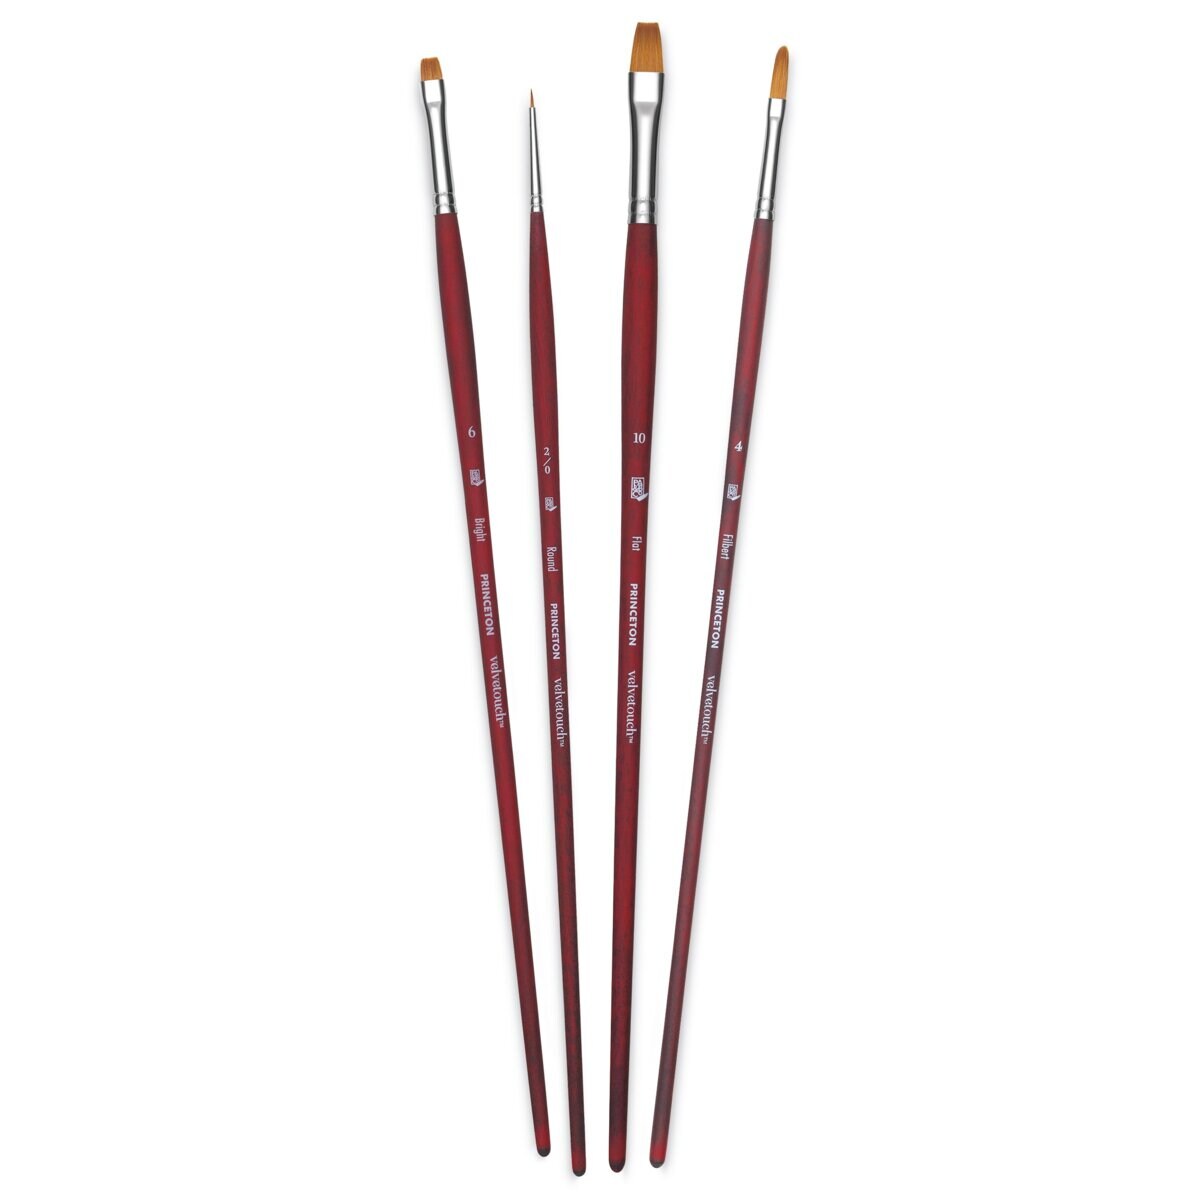 Princeton Velvetouch Series 3900 Brushes - Set of 4, Long Handle